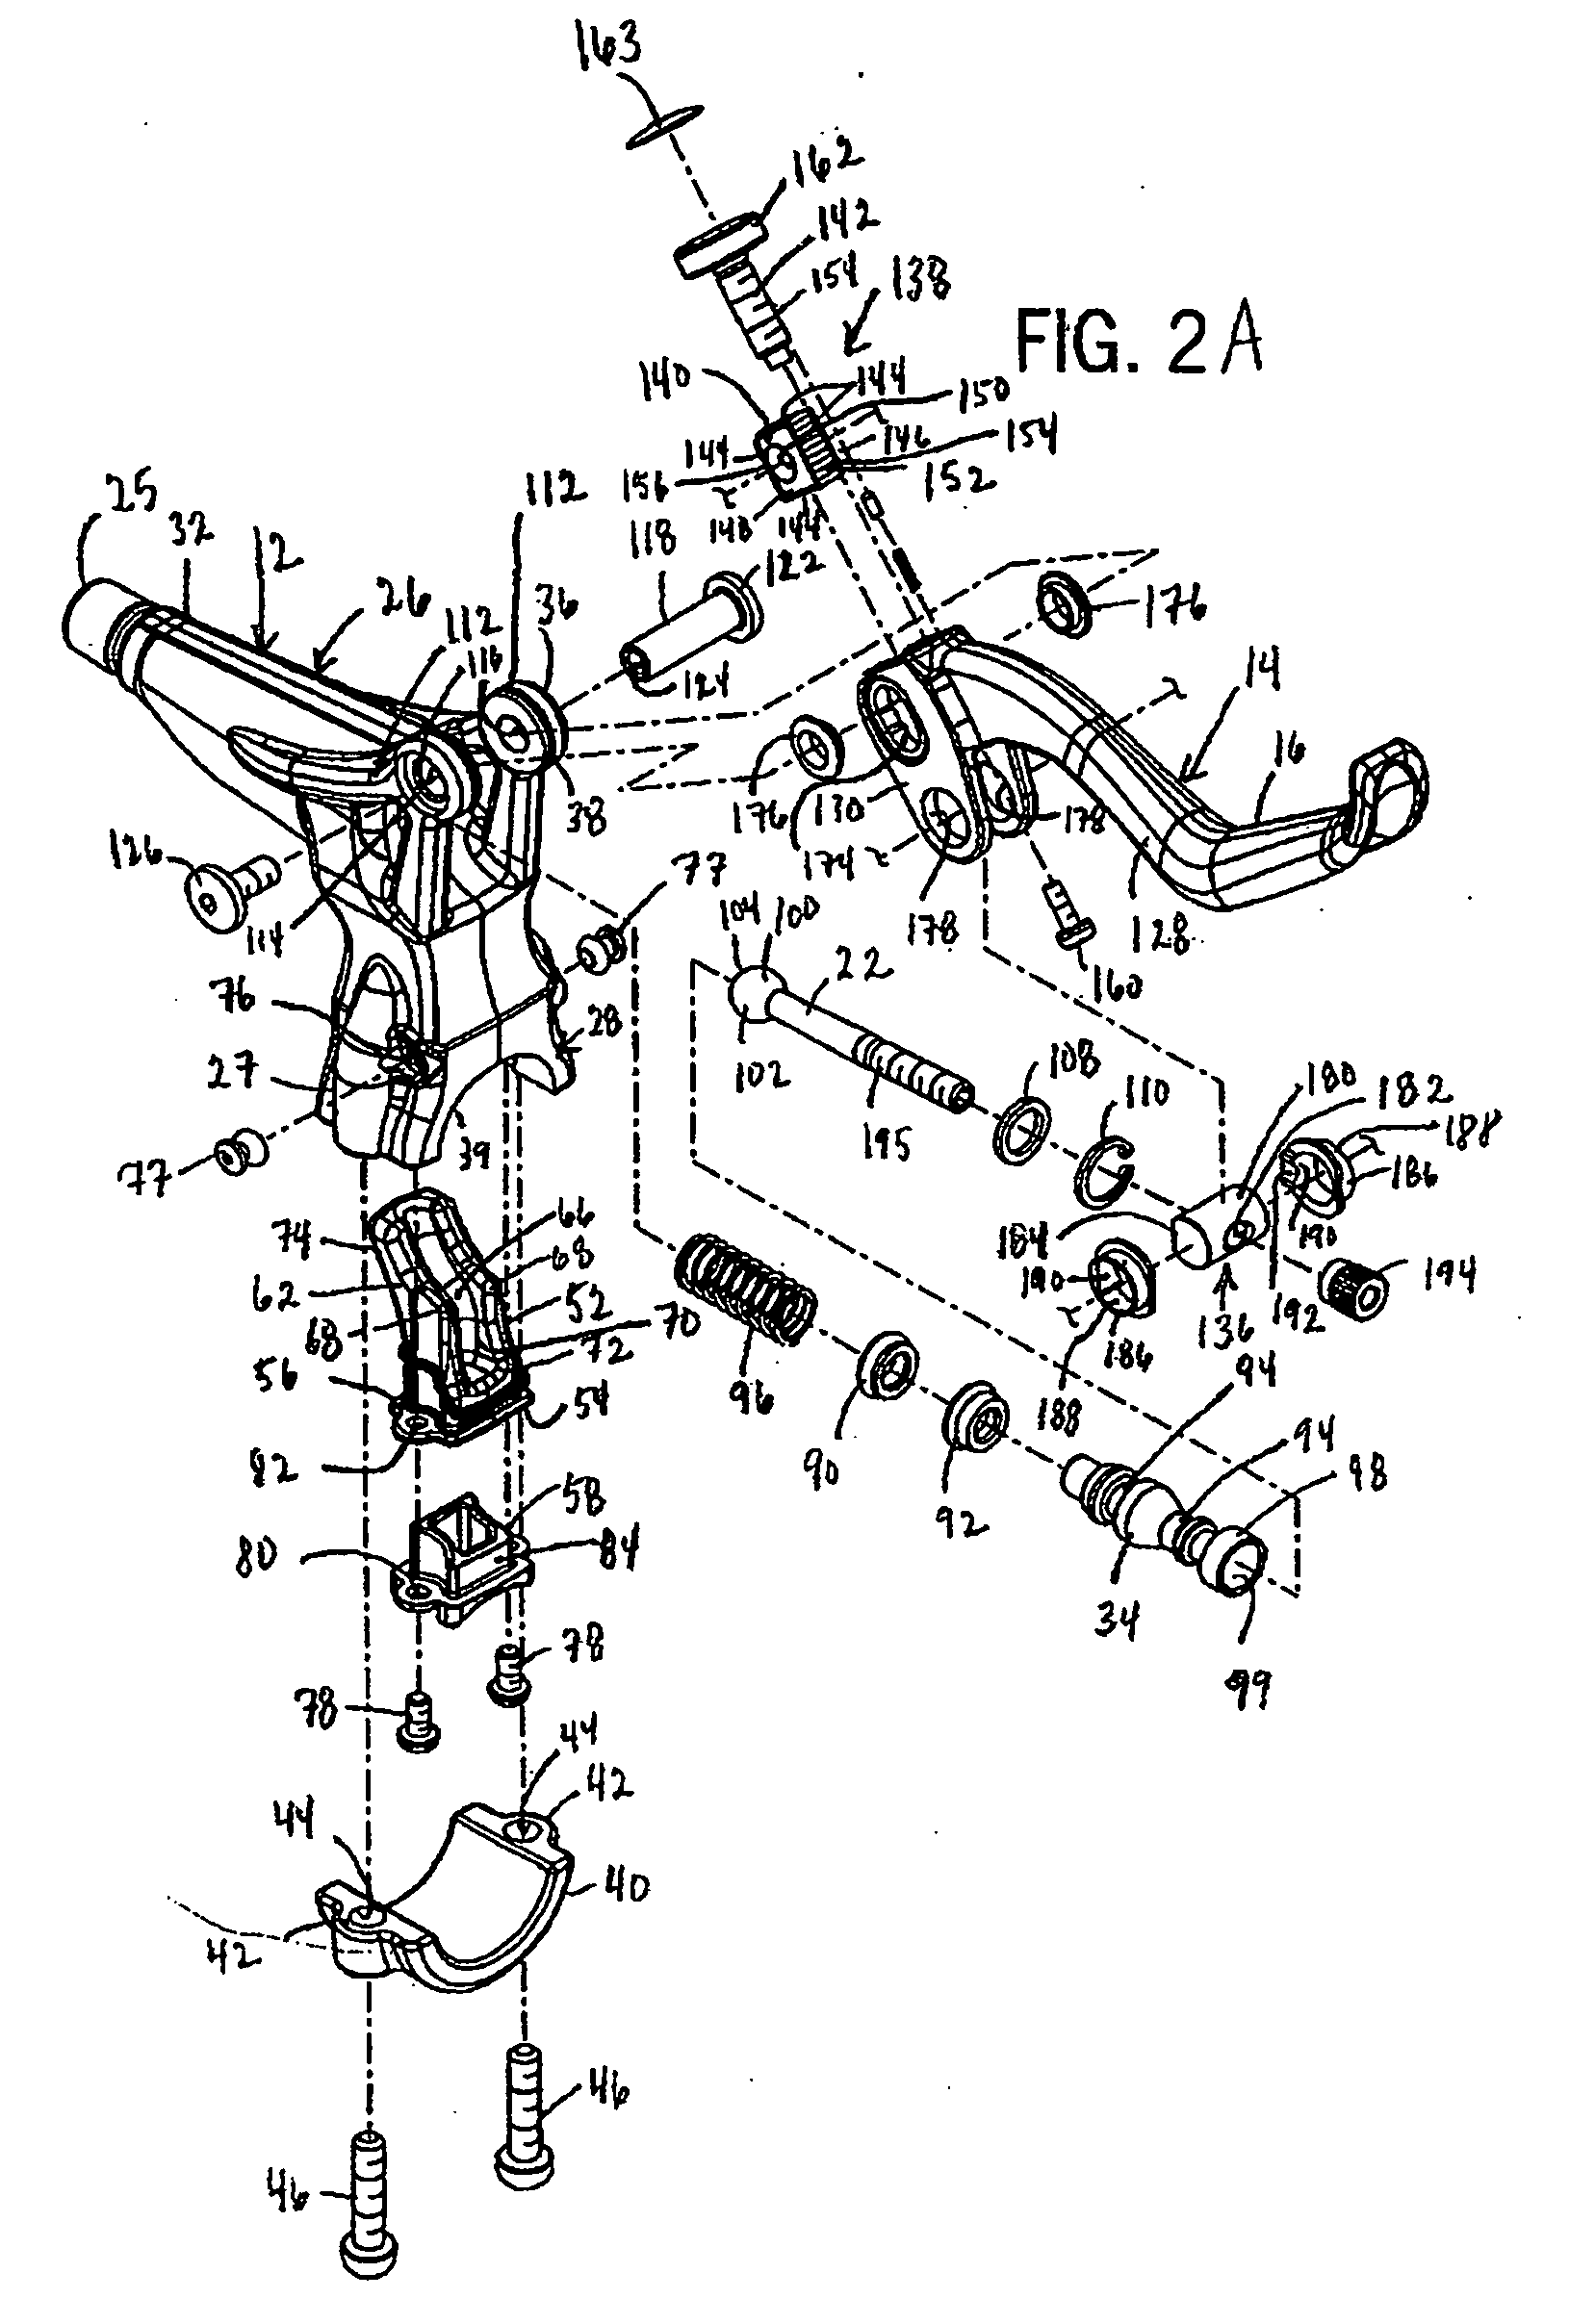 Lever assembly and master cylinder